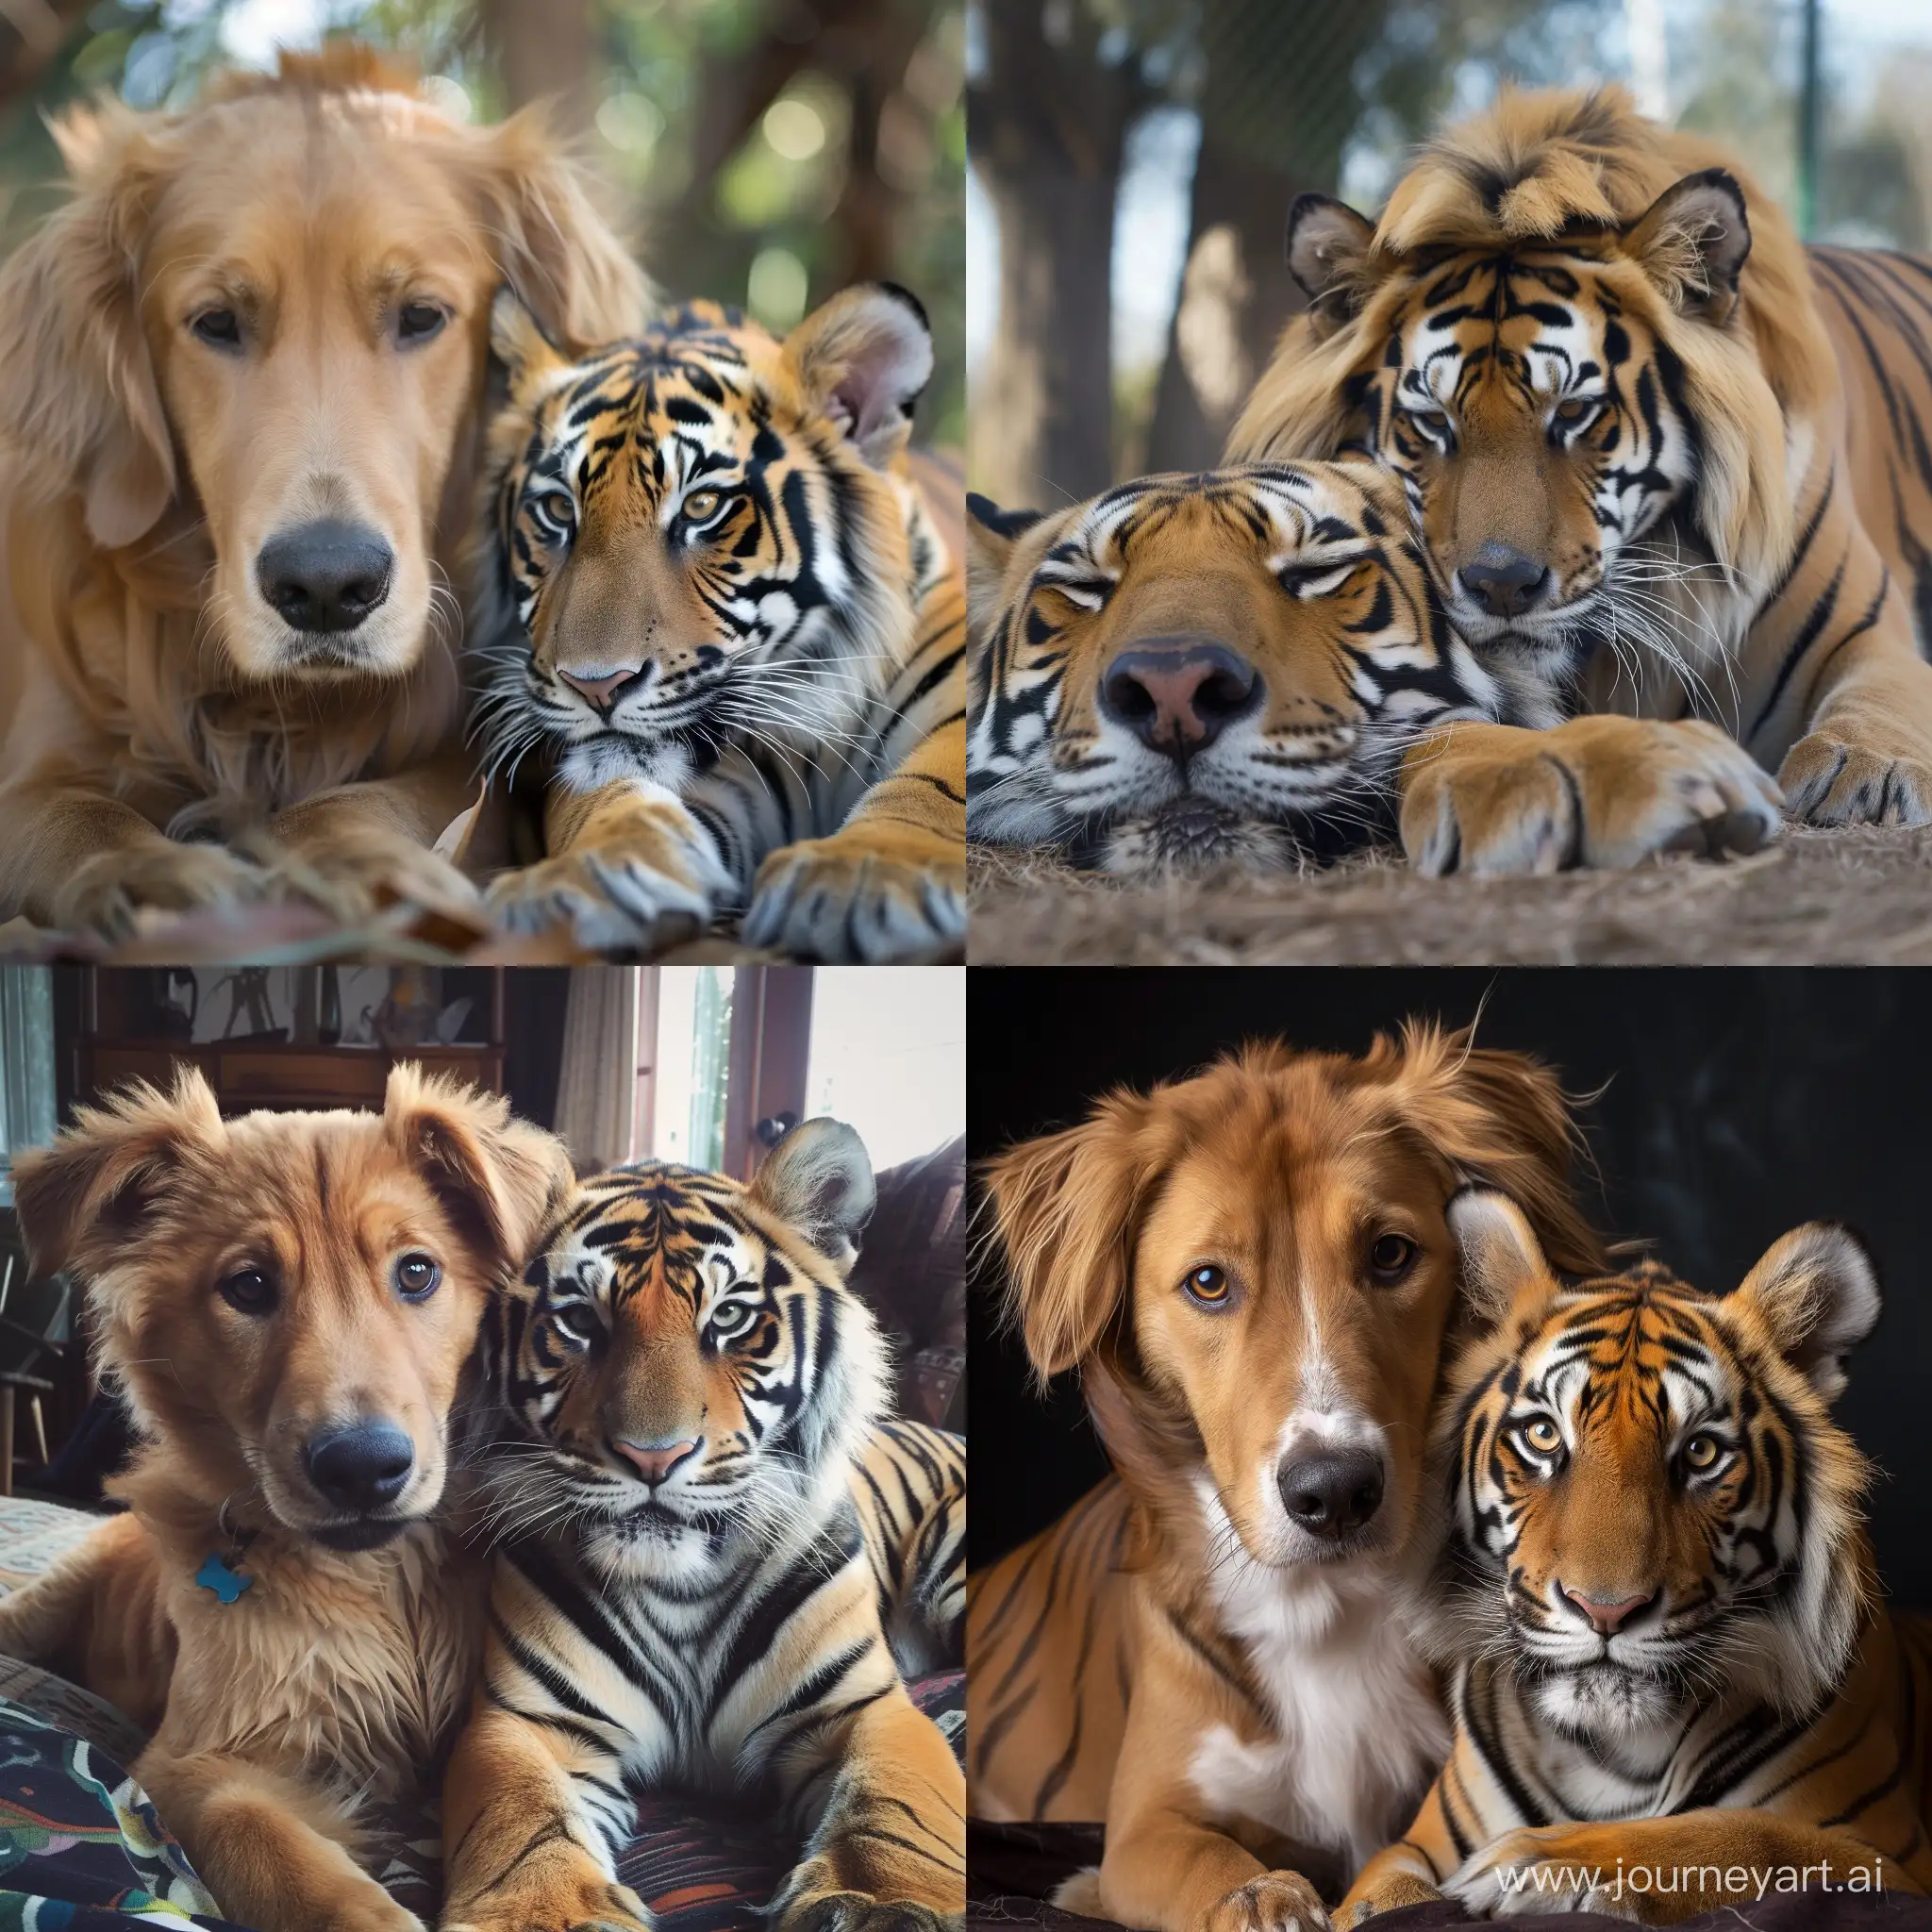 Playful-Dog-and-Tiger-in-Harmonious-Interaction